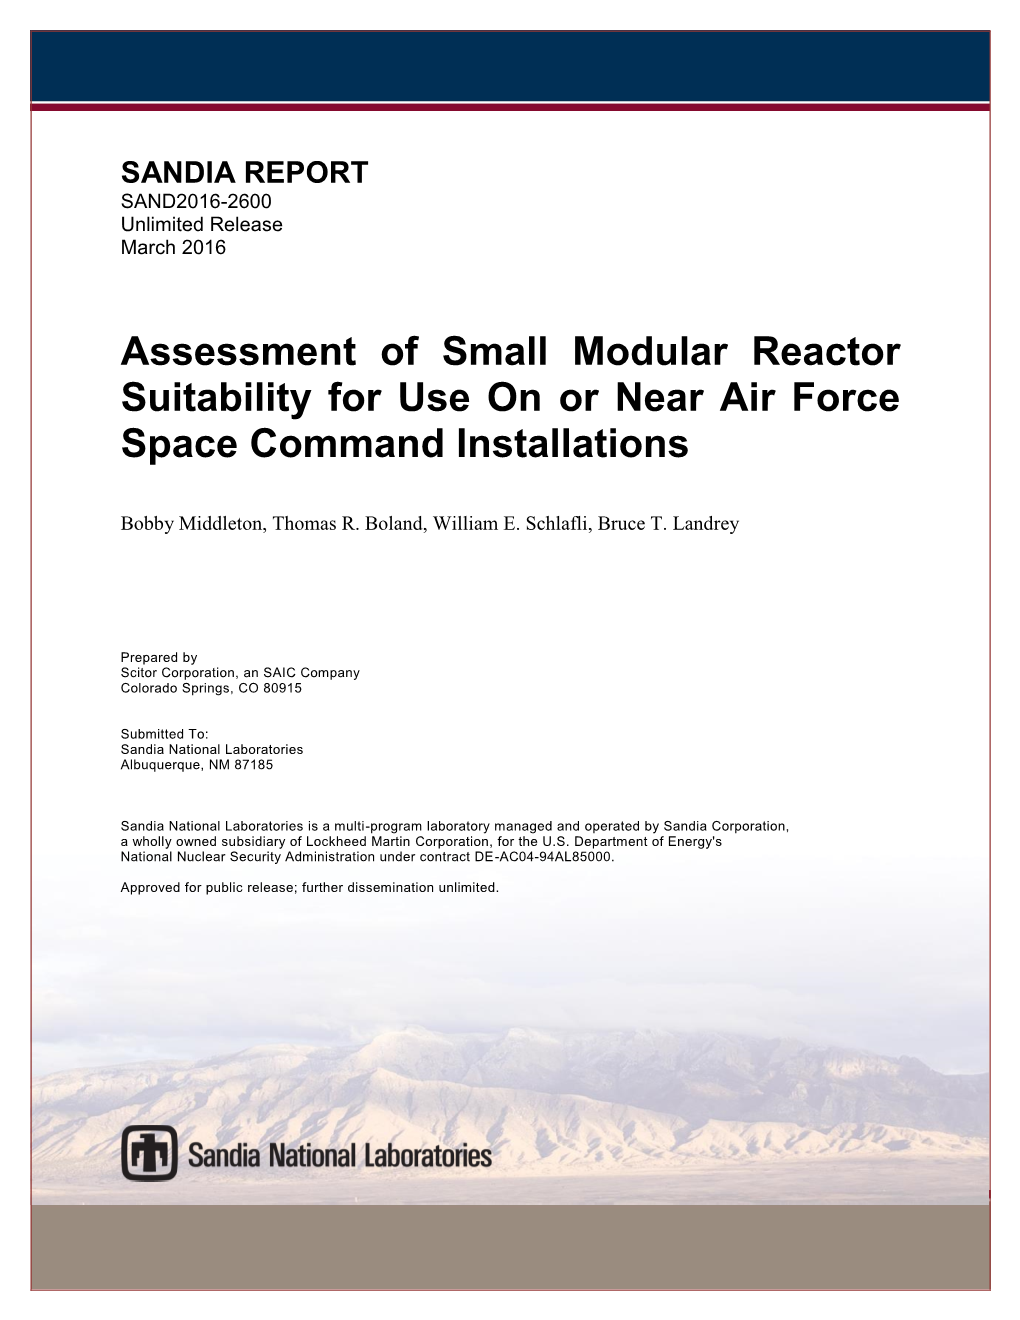 SANDIA REPORT SAND2016-2600 Unlimited Release March 2016